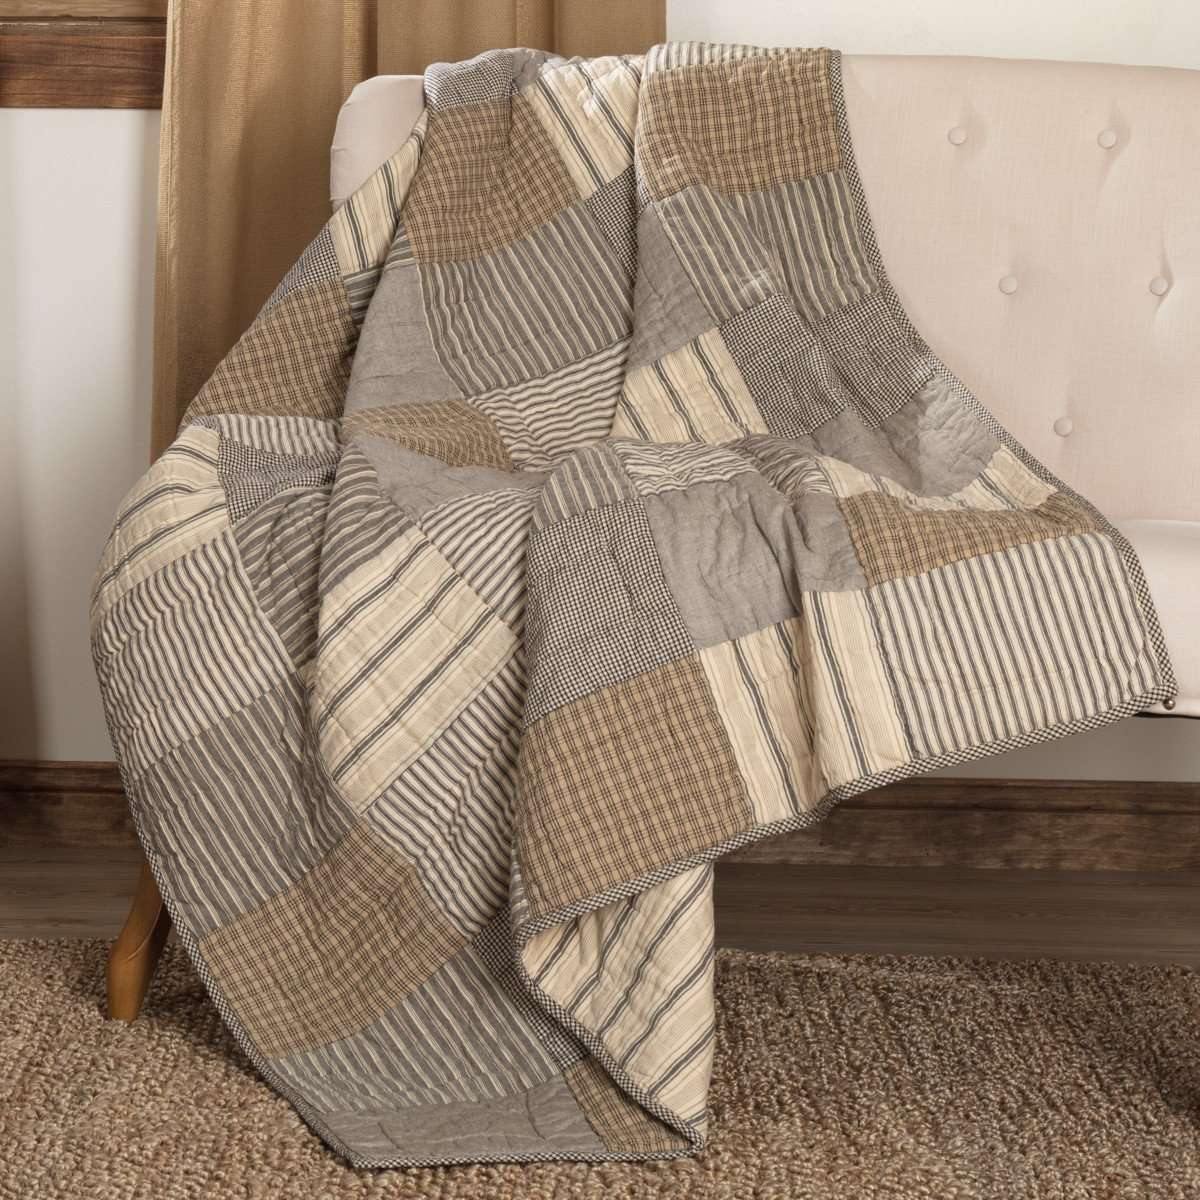 Sawyer Mill Charcoal Block Quilted Throw 60x50 VHC Brands